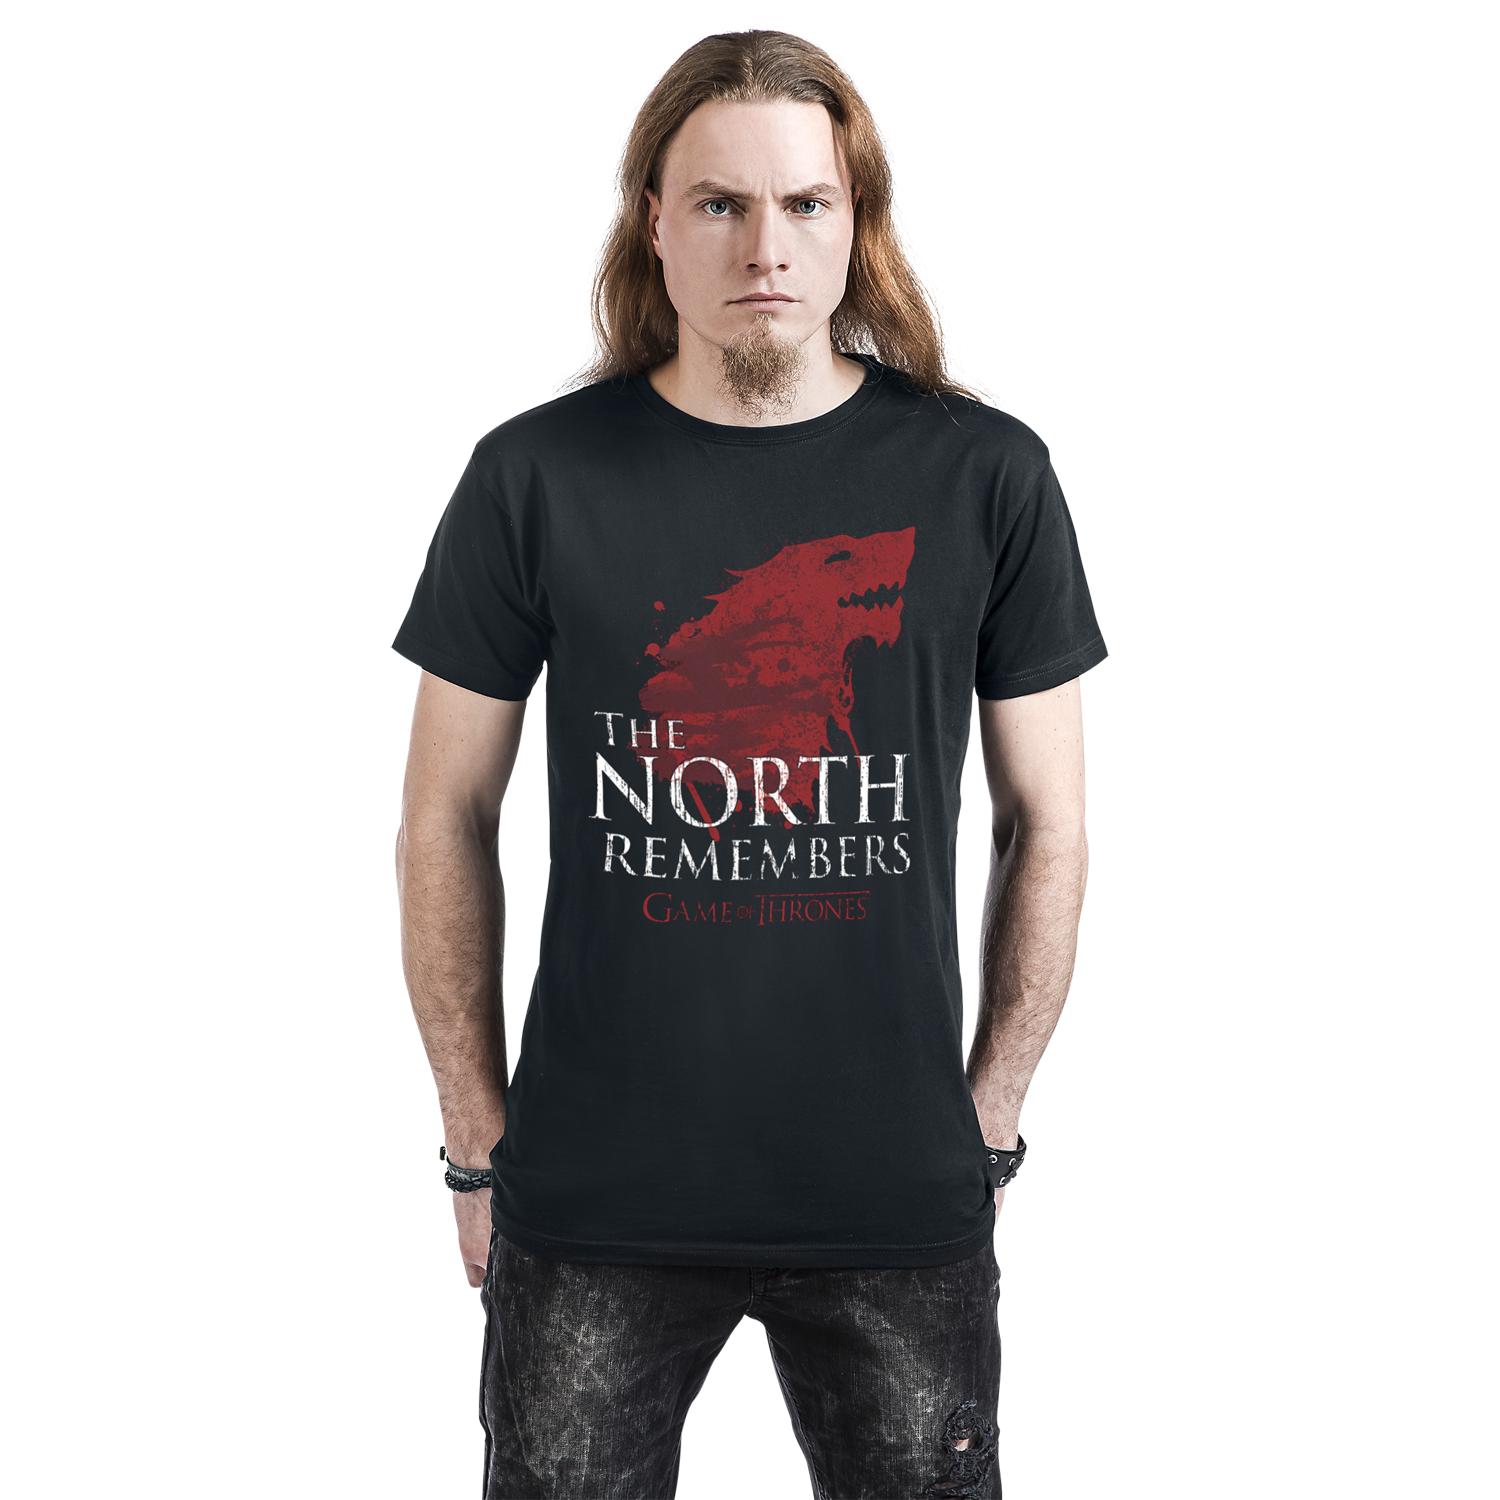 House Stark - The North Remembers T-shirt Design tee